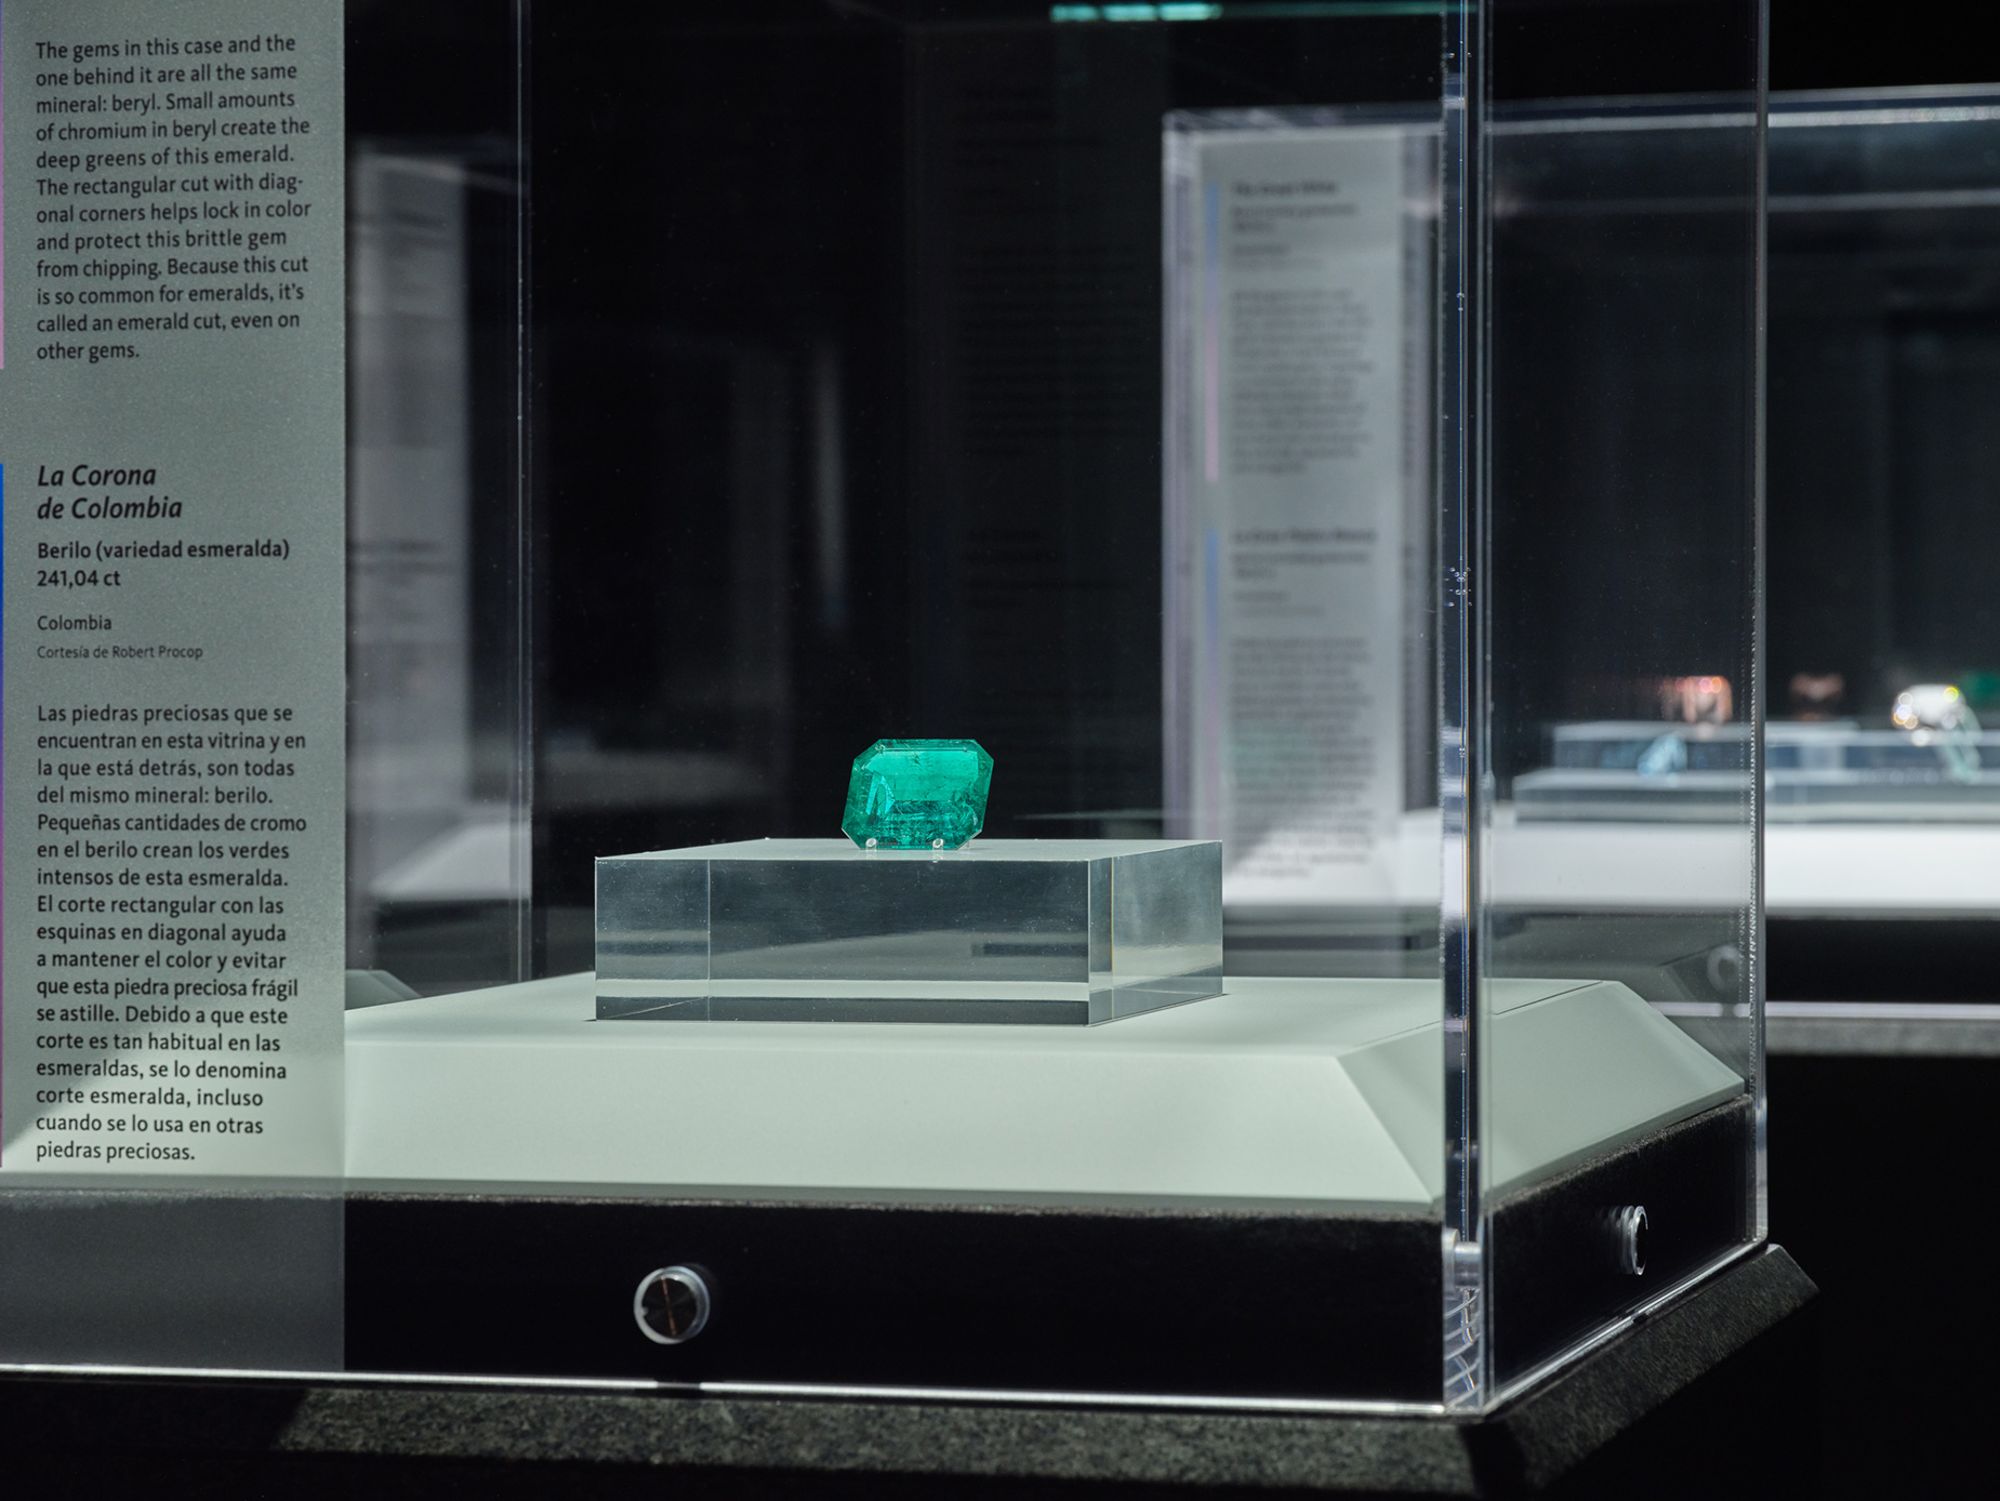 An emerald weighing in at just over 241 carats, the "Crown of Colombia" is one of the exhibition's stand-out pieces.